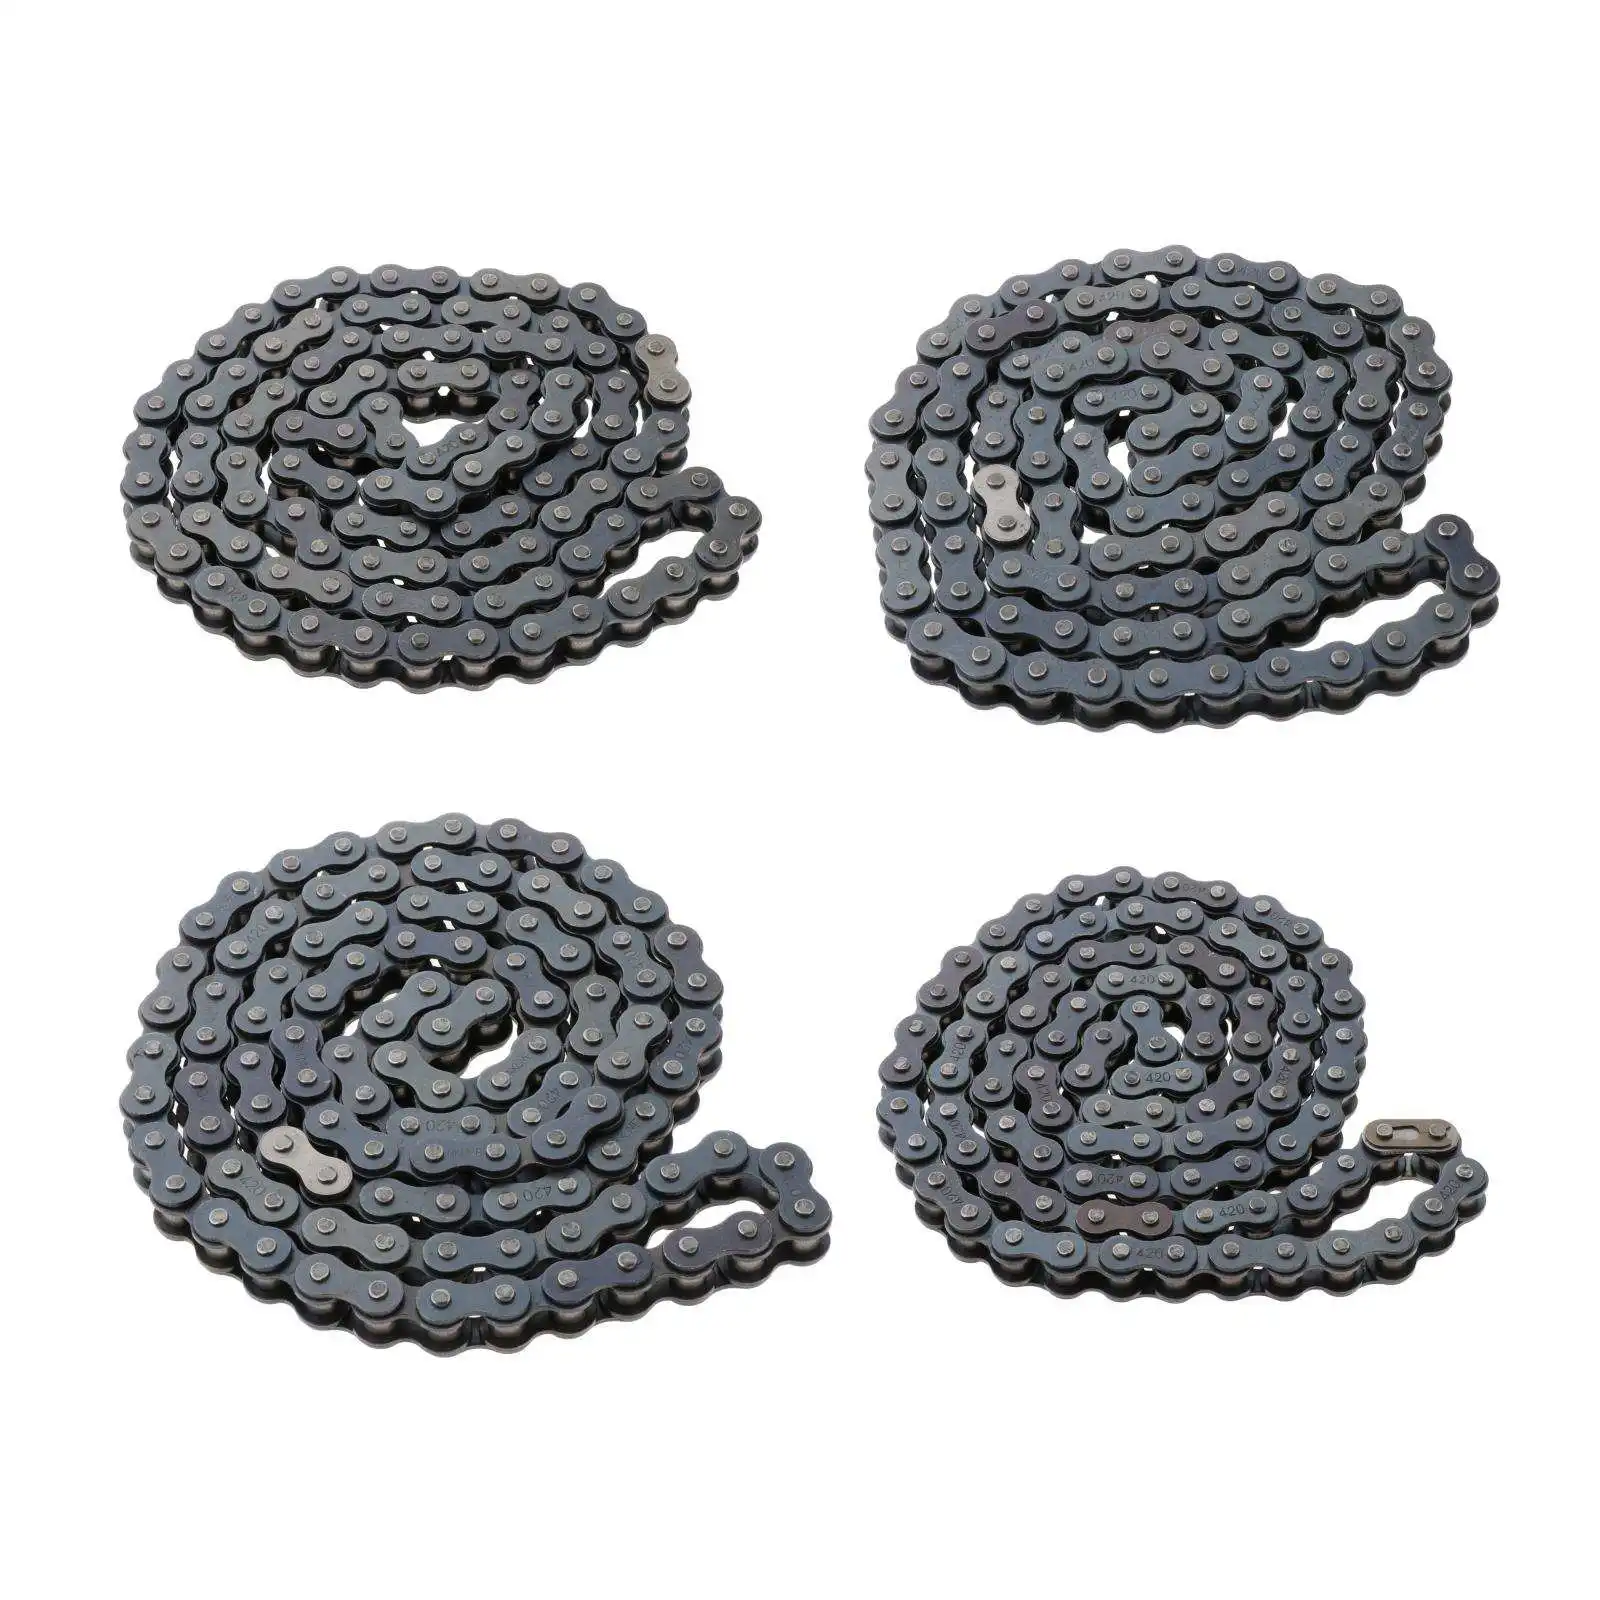 420 Motorcycle Chain 50-110Cc Spare Parts 420 Standard Roller Chain for Mini Bike